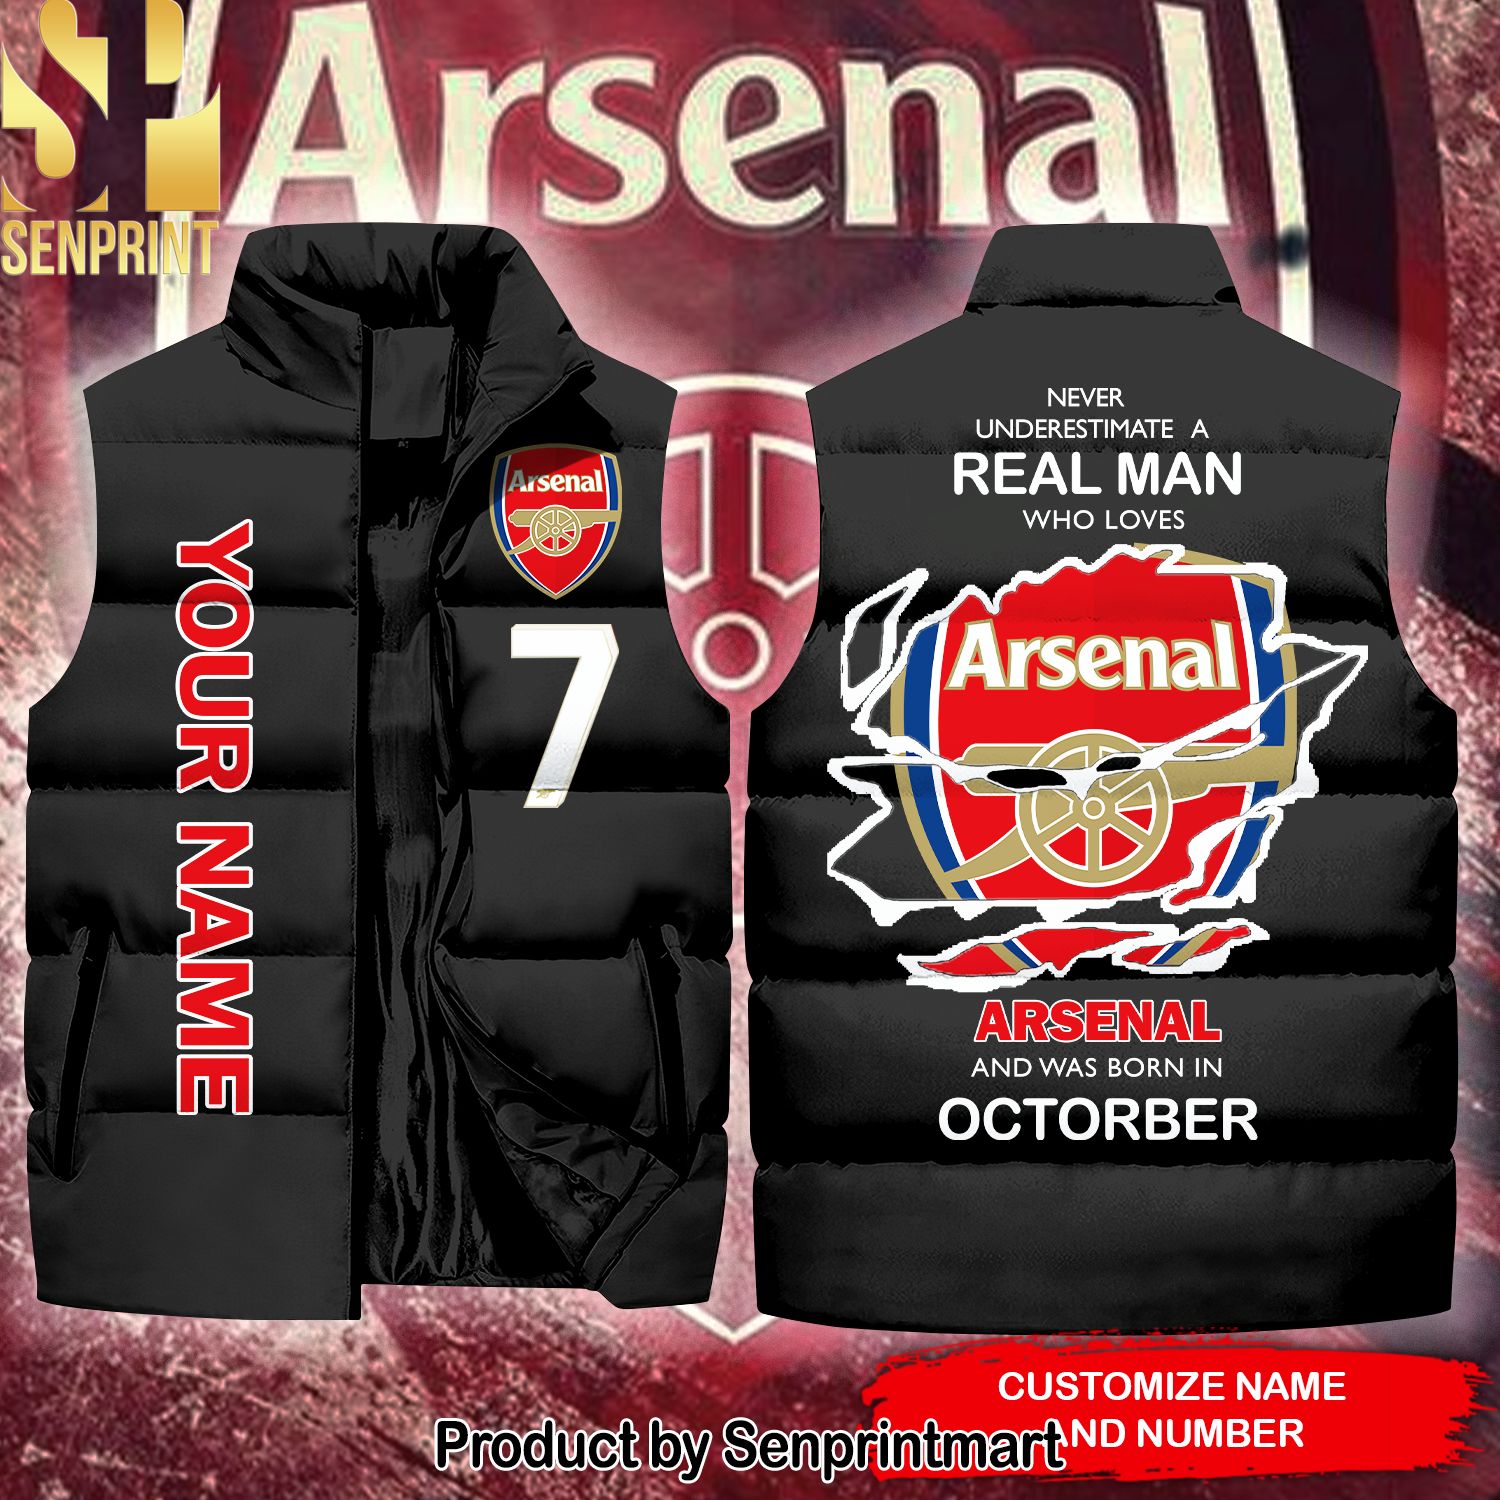 REAL MAN WHO LOVES Arsenal AND WAS BORN IN OCTOBER Name Number High Fashion Sleeveless Jacket